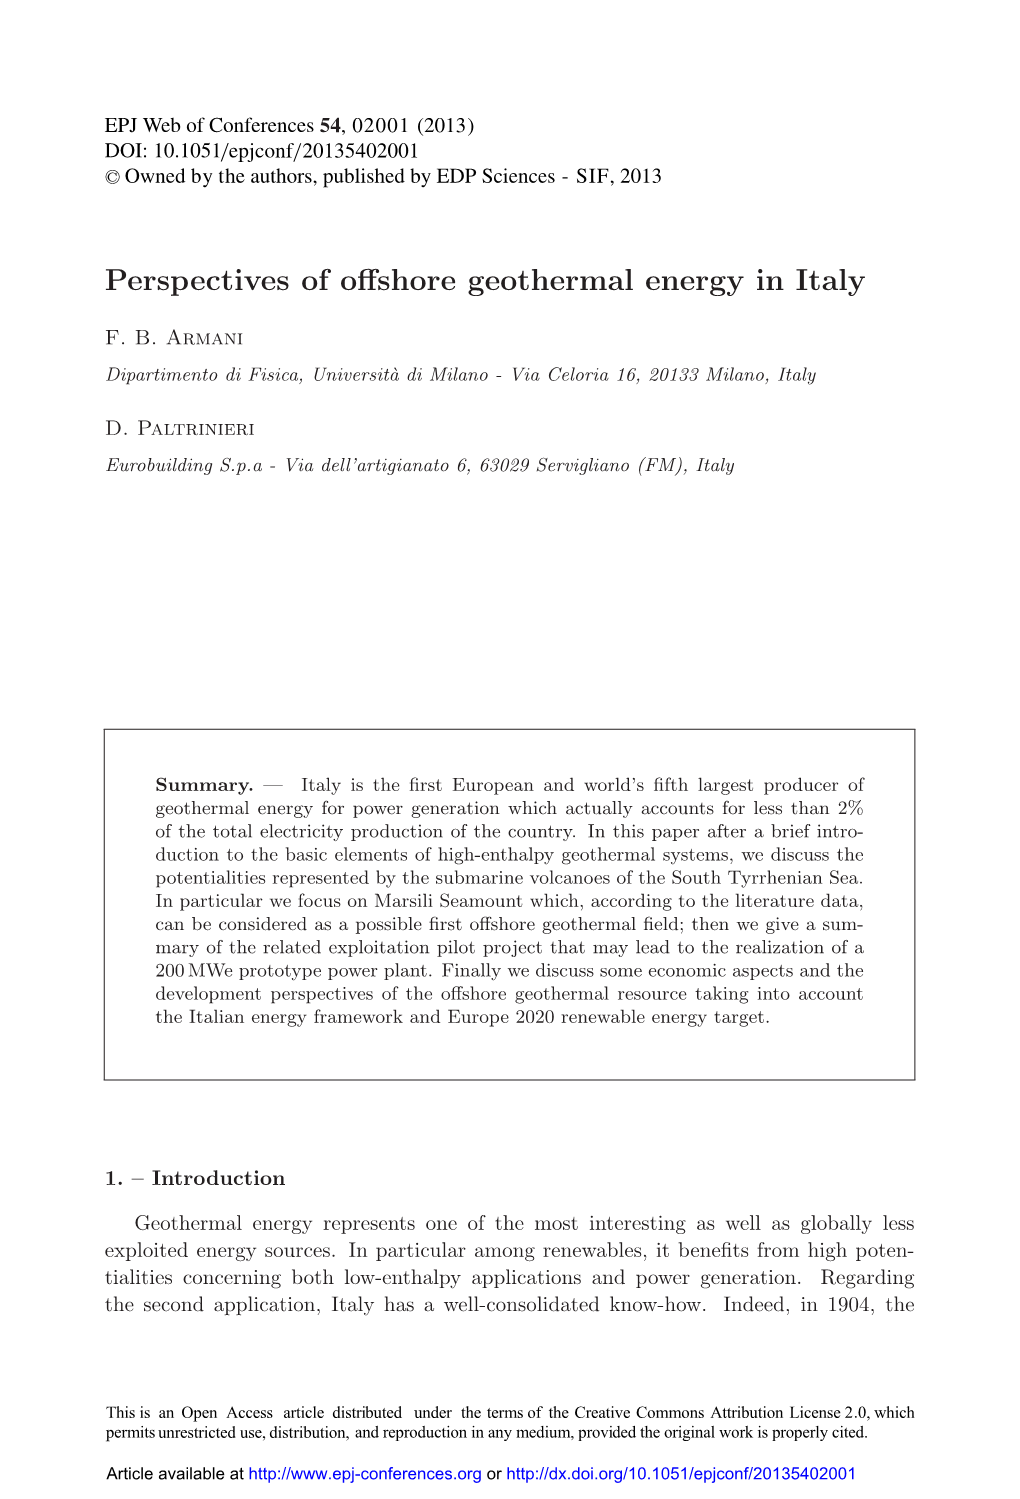 Perspectives of Offshore Geothermal Energy in Italy